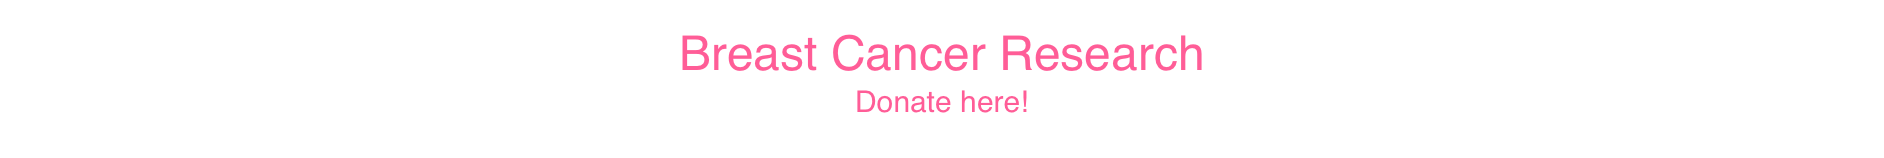 Breast Cancer Research
Donate here!